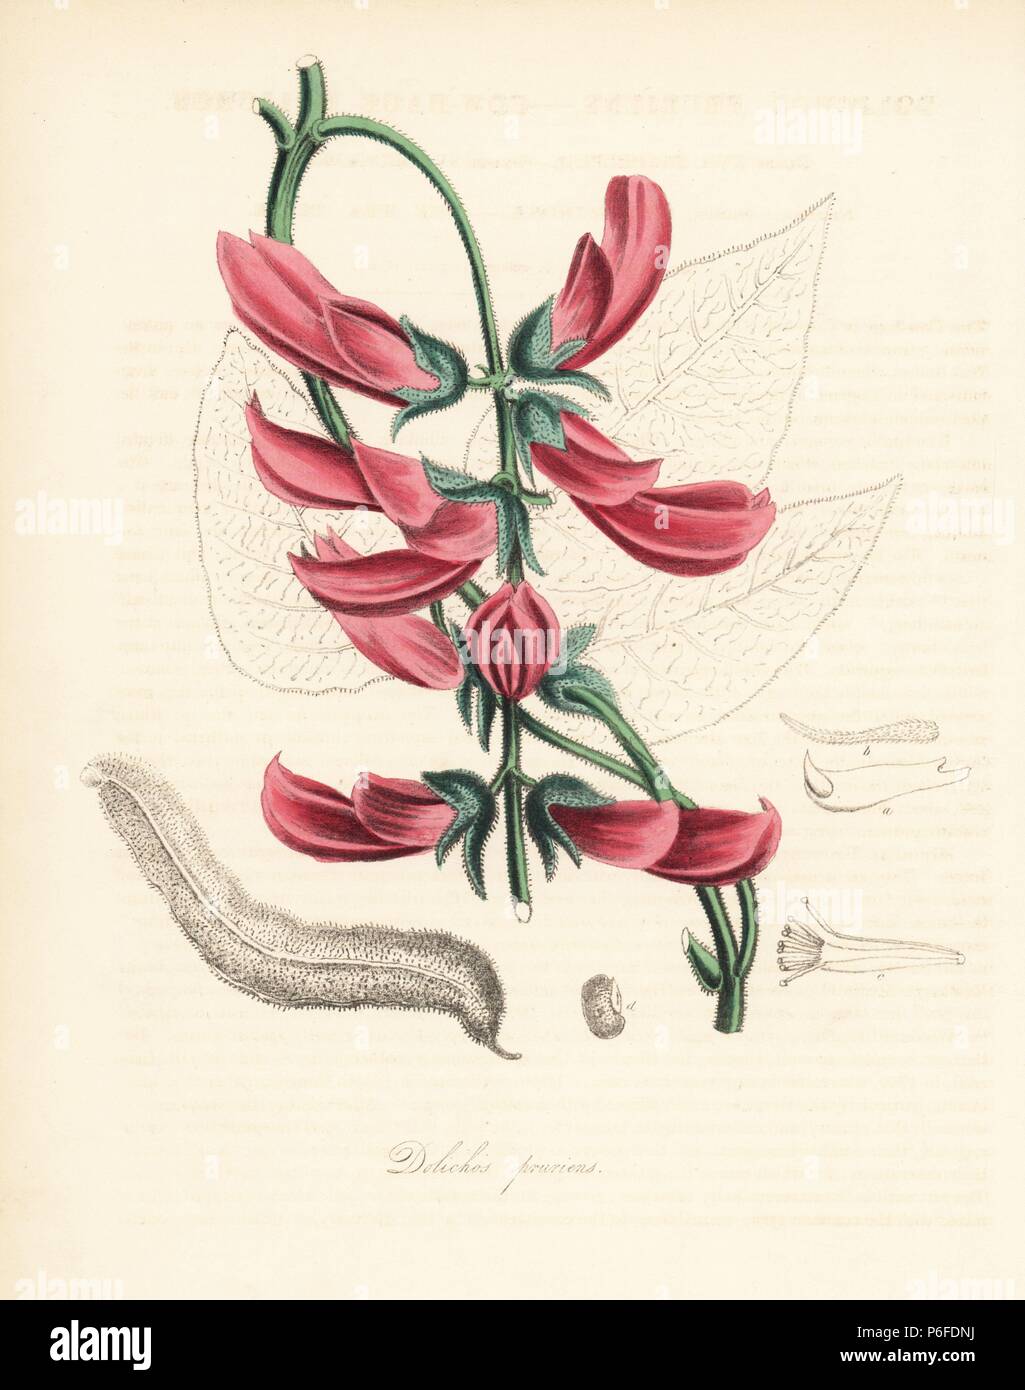 Velvet bean or Yokohama bean, Mucuna pruriens (Cow-hage dolichos, Dolichos pruriens). After an illustration in Stephenson and Churchill's 'Medical Botany.' Handcoloured zincograph by C. Chabot drawn by Miss M. A. Burnett from her 'Plantae Utiliores: or Illustrations of Useful Plants,' Whittaker, London, 1842. Miss Burnett drew the botanical illustrations, but the text was chiefly by her late brother, British botanist Gilbert Thomas Burnett (1800-1835). Stock Photo